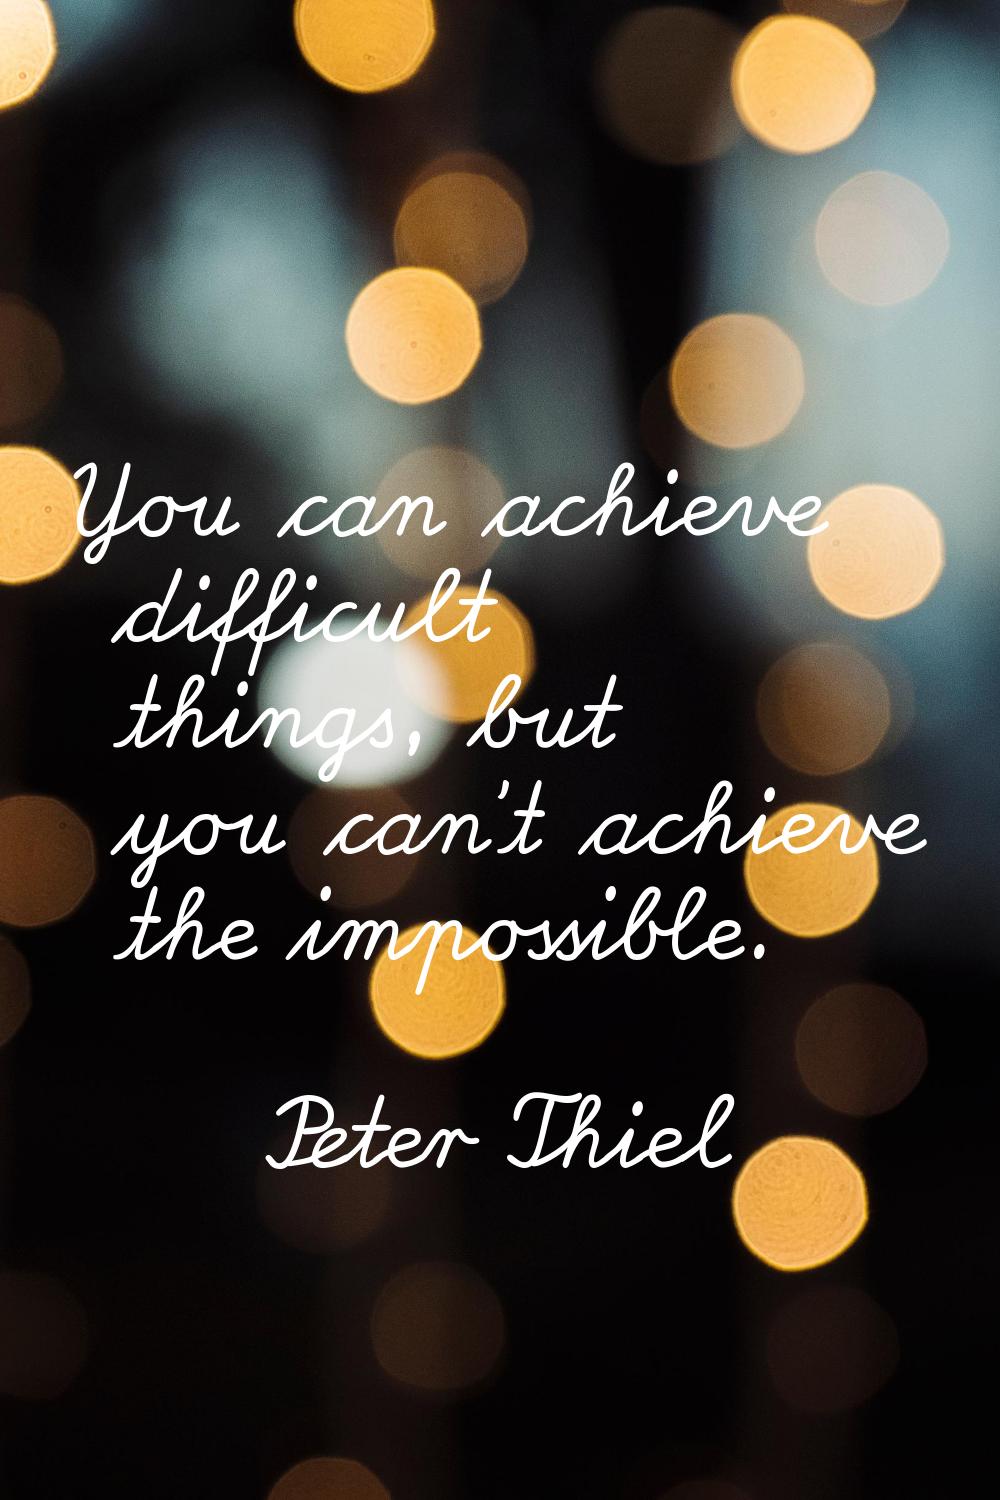 You can achieve difficult things, but you can't achieve the impossible.